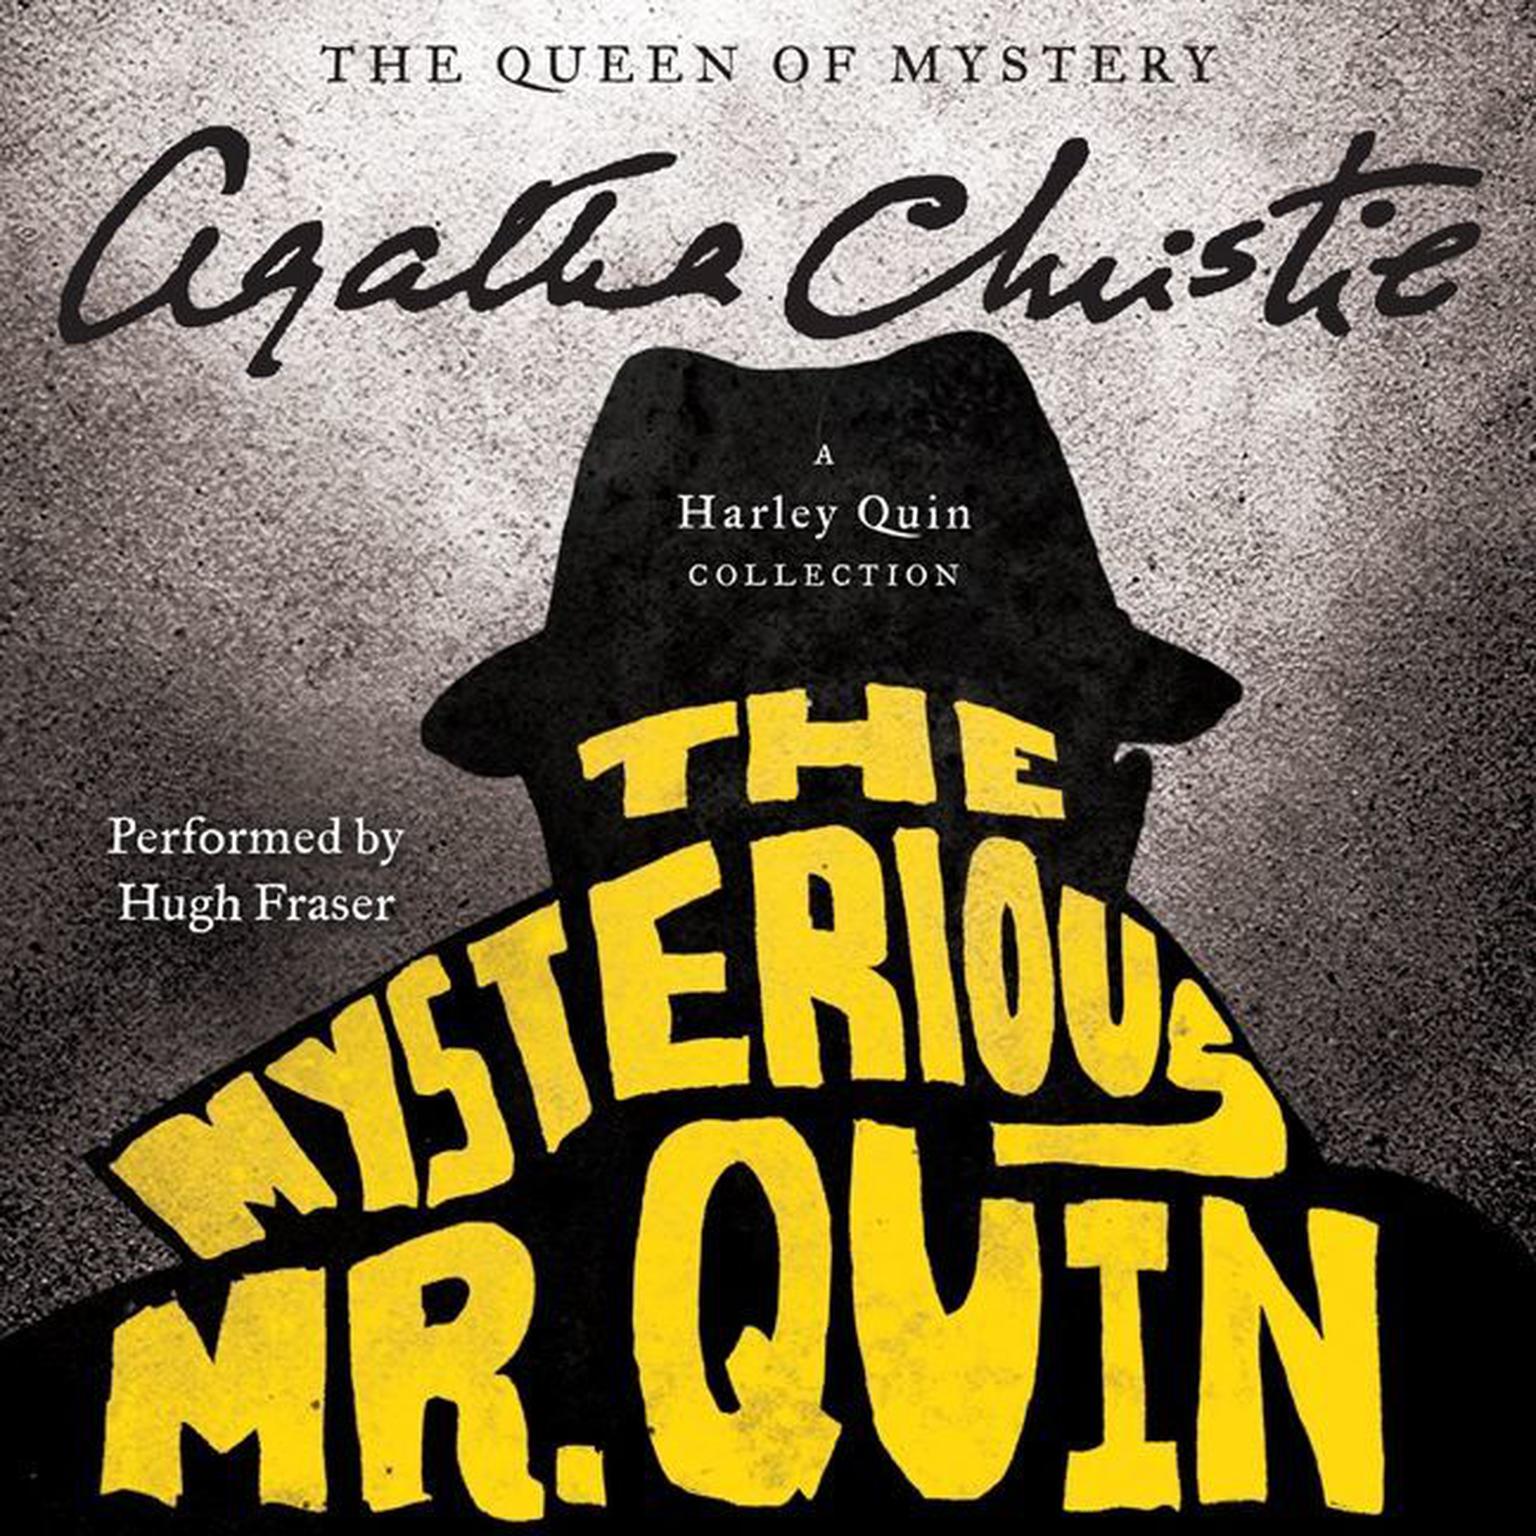 The Mysterious Mr. Quin: A Harley Quin Collection Audiobook, by Agatha Christie